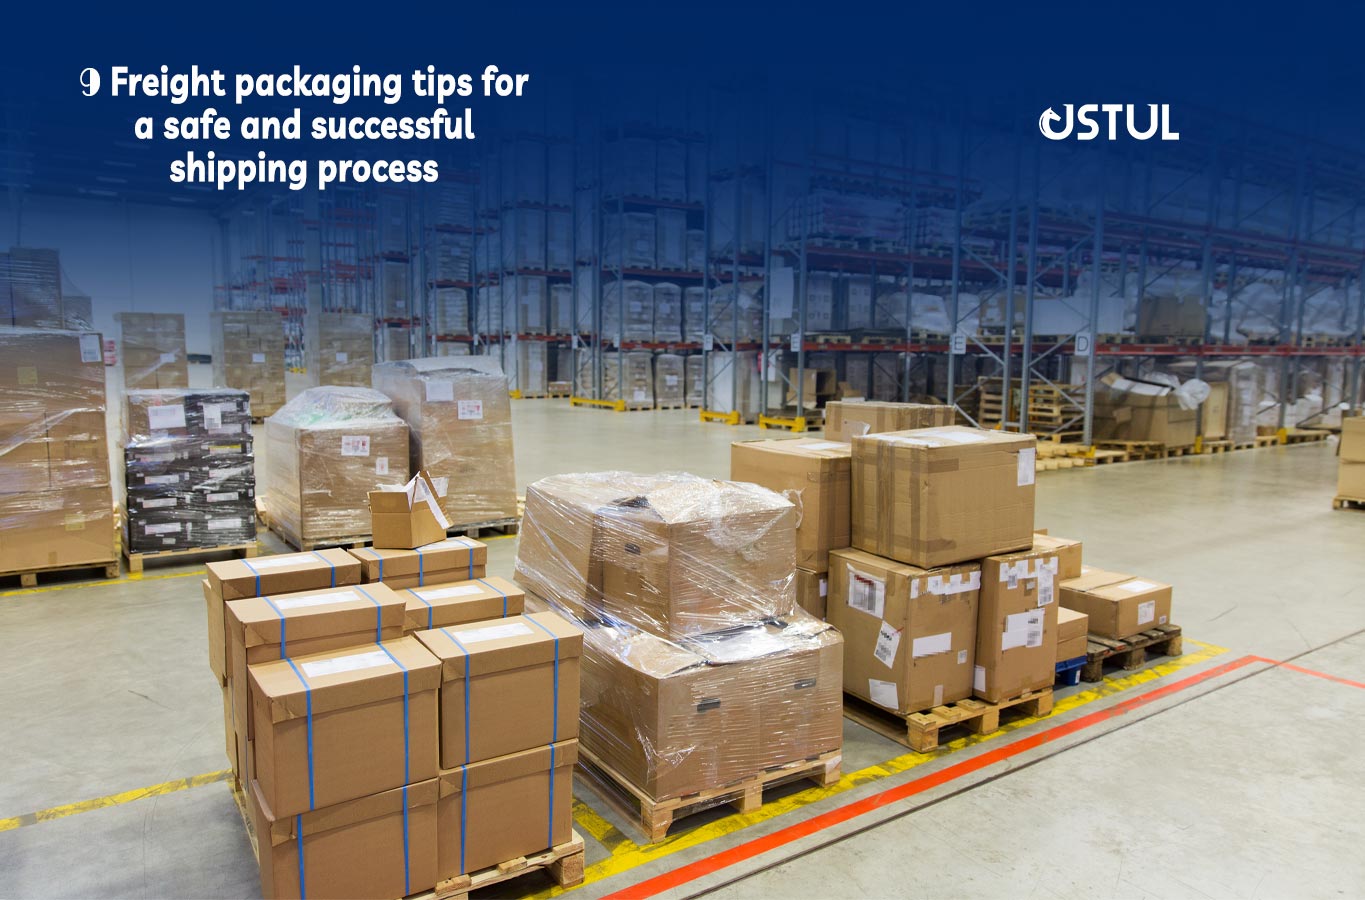 9 Freight Packaging Tips For a safe and successful shipping process